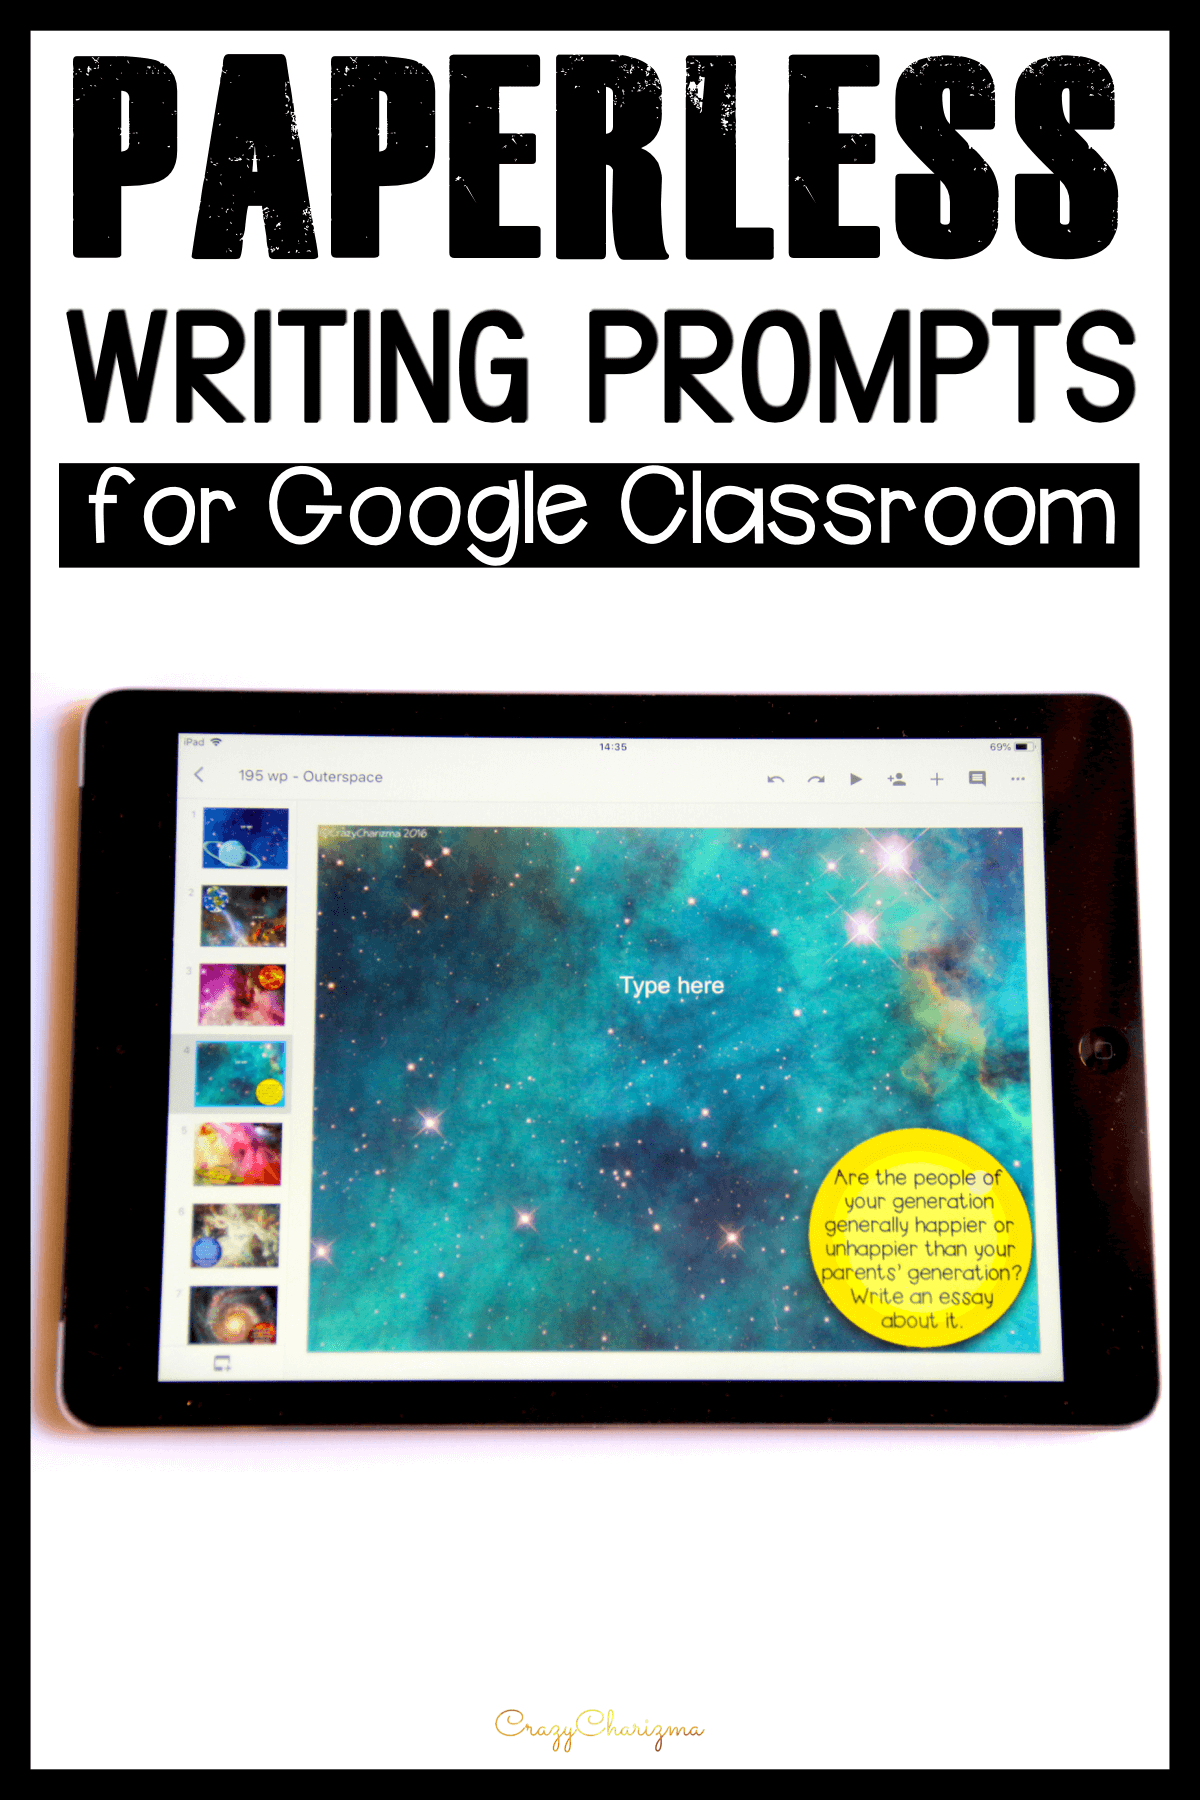 Engage students with writing starting today! Use technology (iPads, Chromebooks, laptops) for quick student writing practice! Working in Google Classroom and Google SLides, let the students start writing right away! Monitor their progress, answer questions and offer feedback as they write.